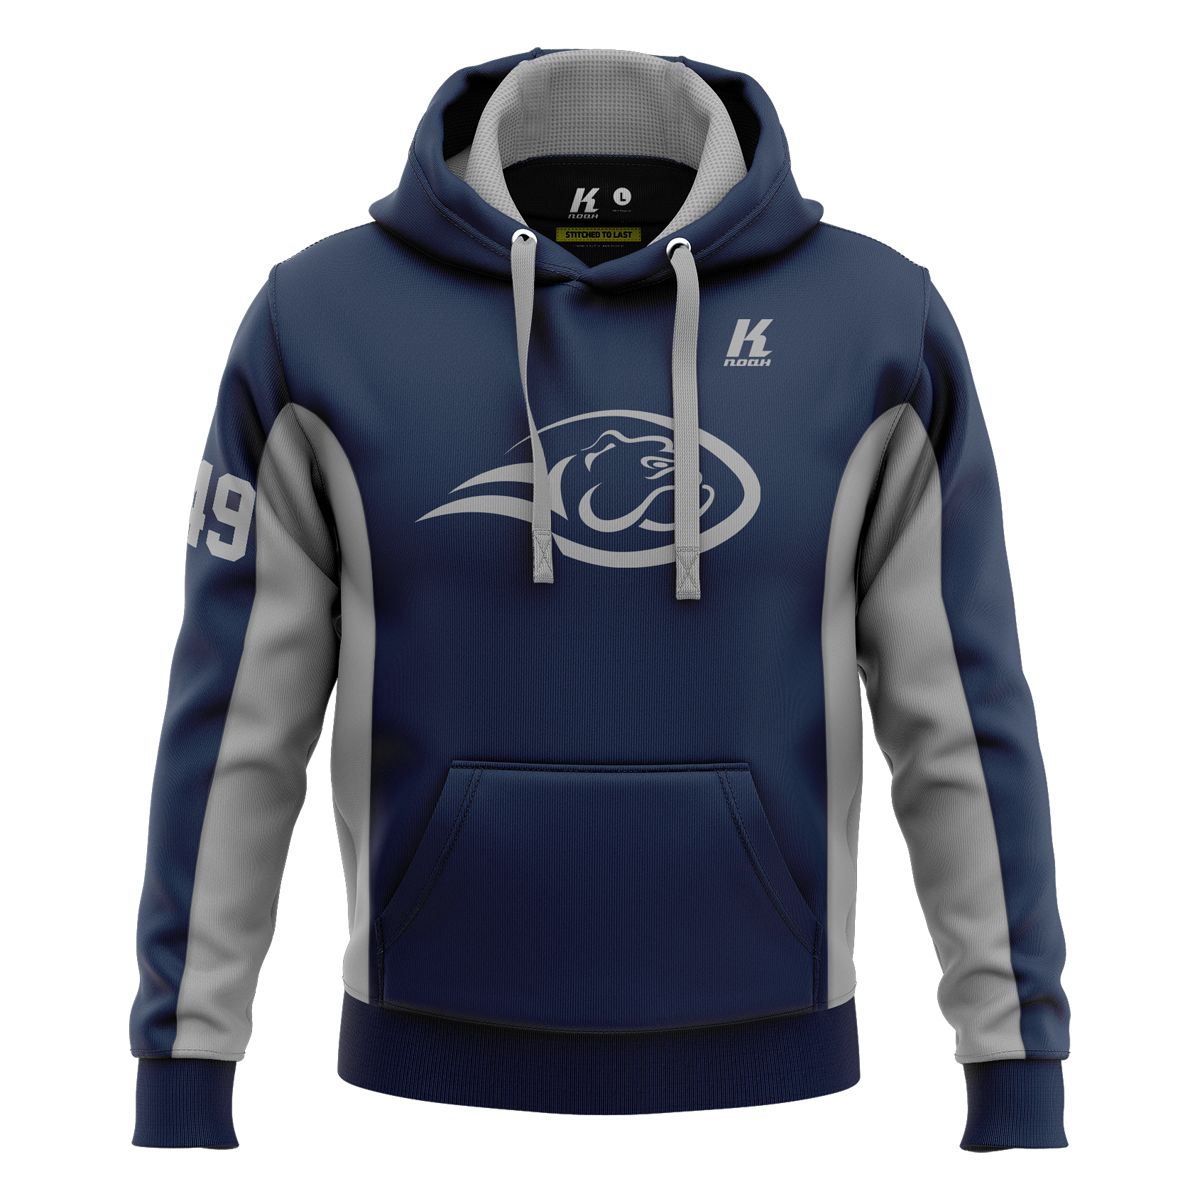 Wilddogs Signature Series Hoodie with Playernumber/Initials